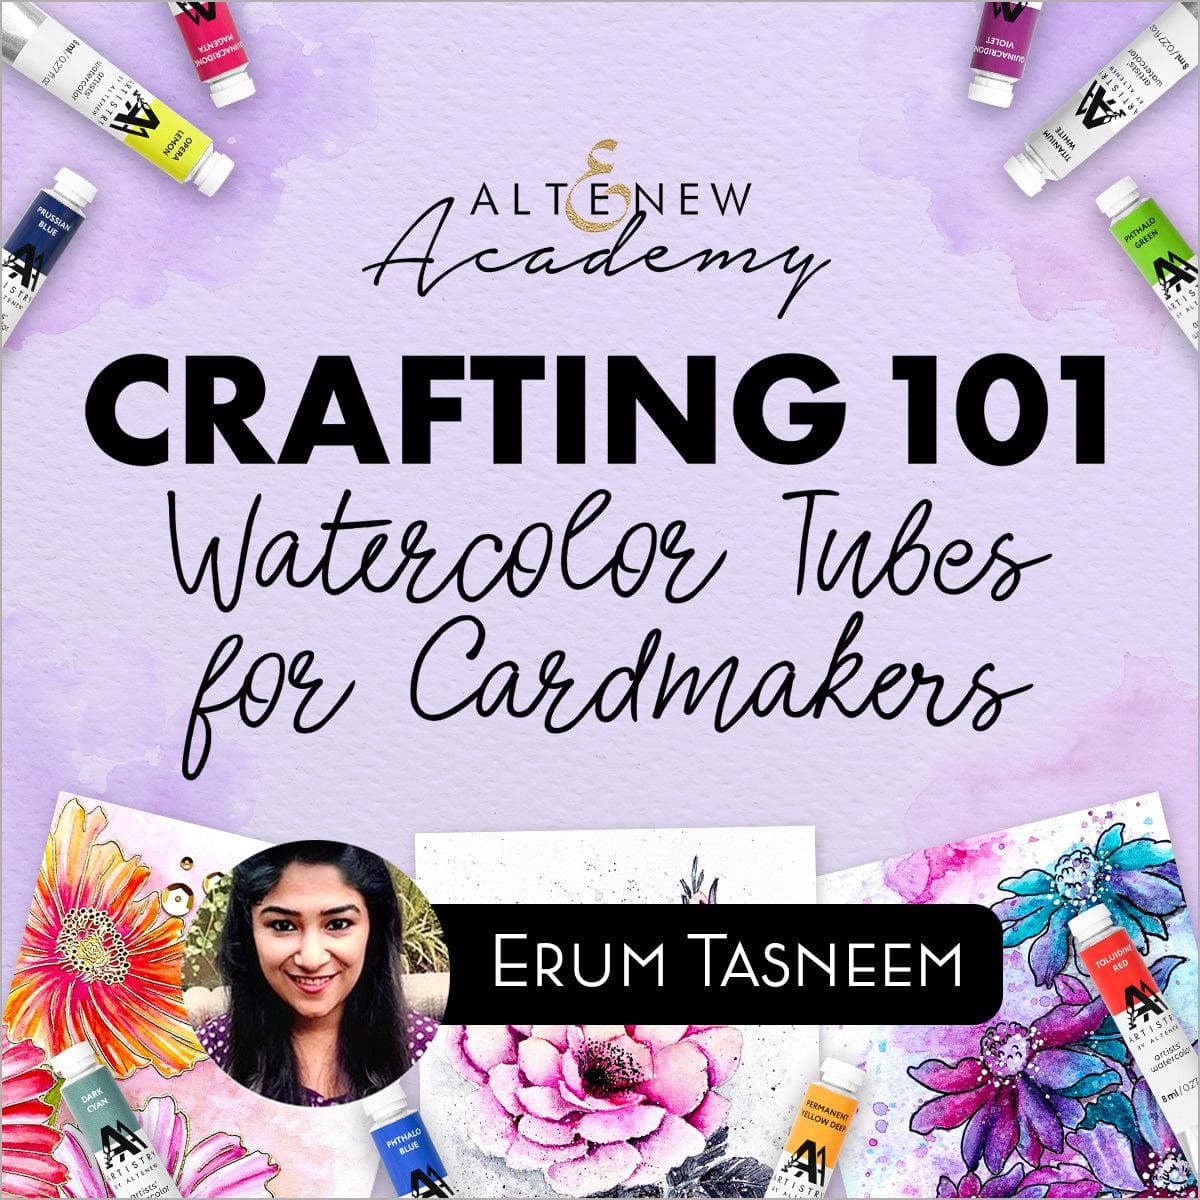 Altenew Class Crafting 101 - Watercolor Tubes